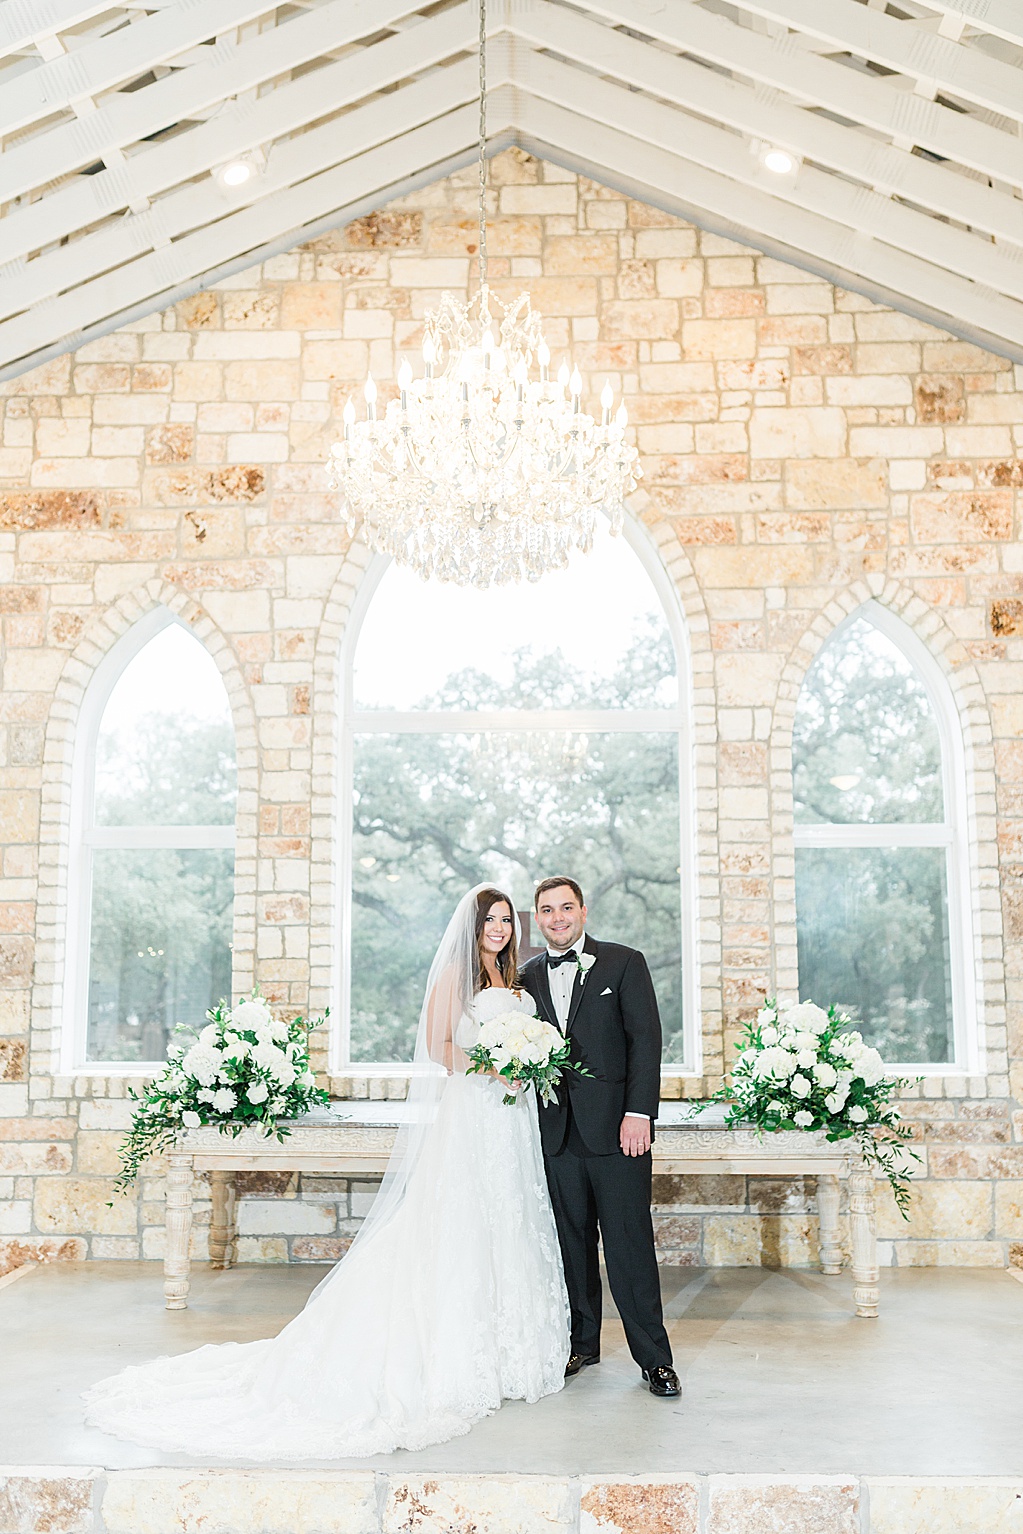 A Rainy Day Black and White Wedding at The Chandelier of Gruene 0051